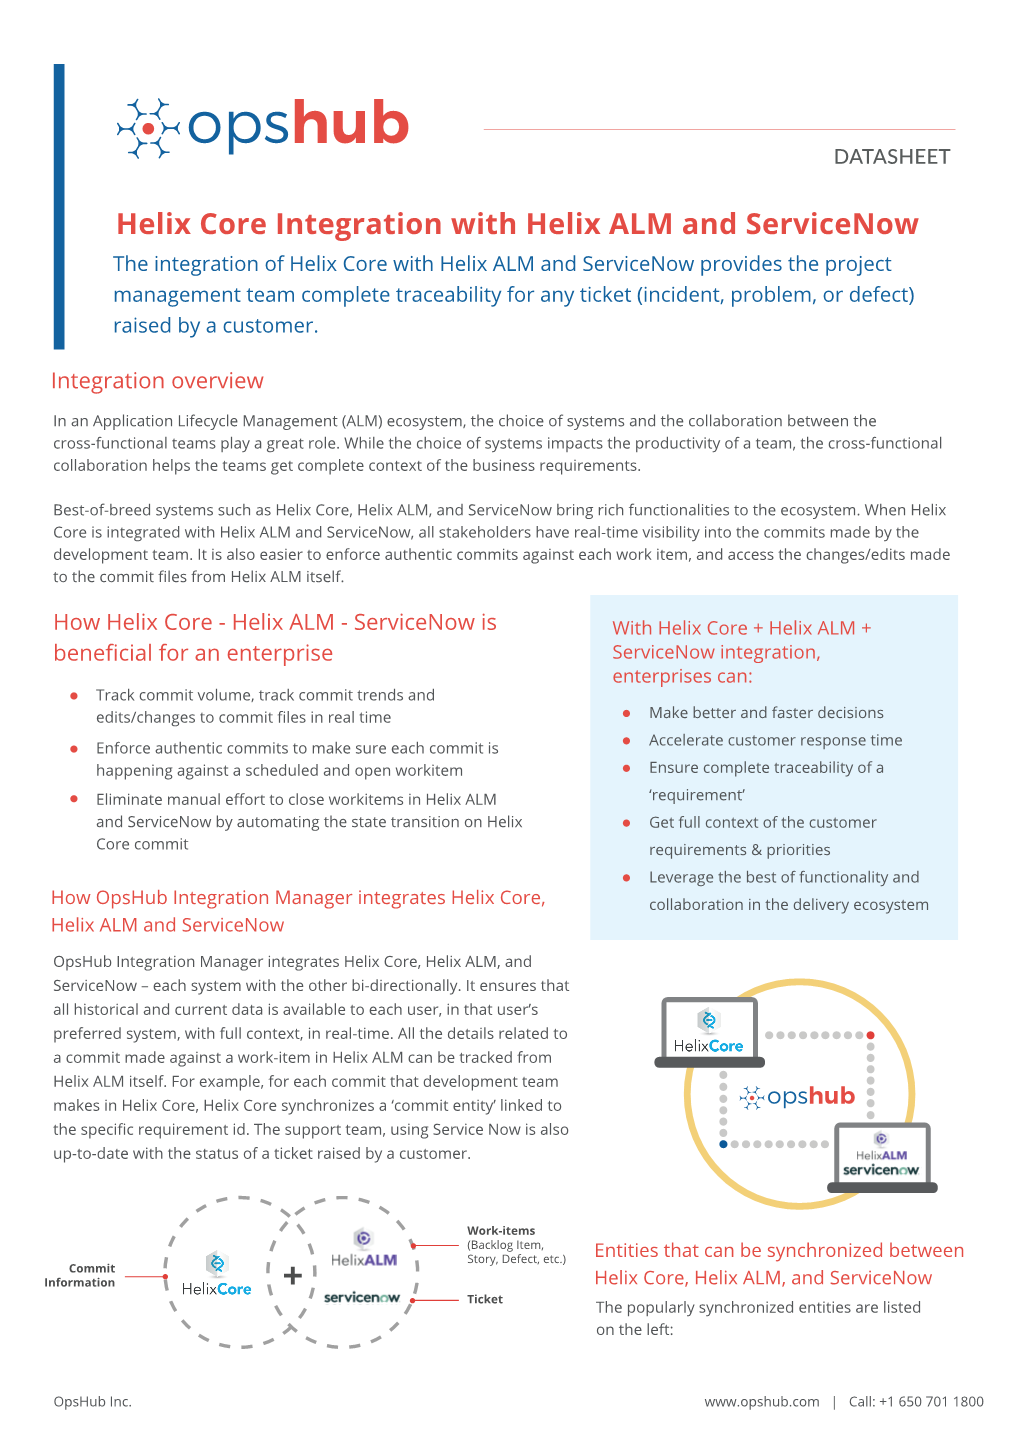 Helix Core Integration with Helix ALM and Servicenow